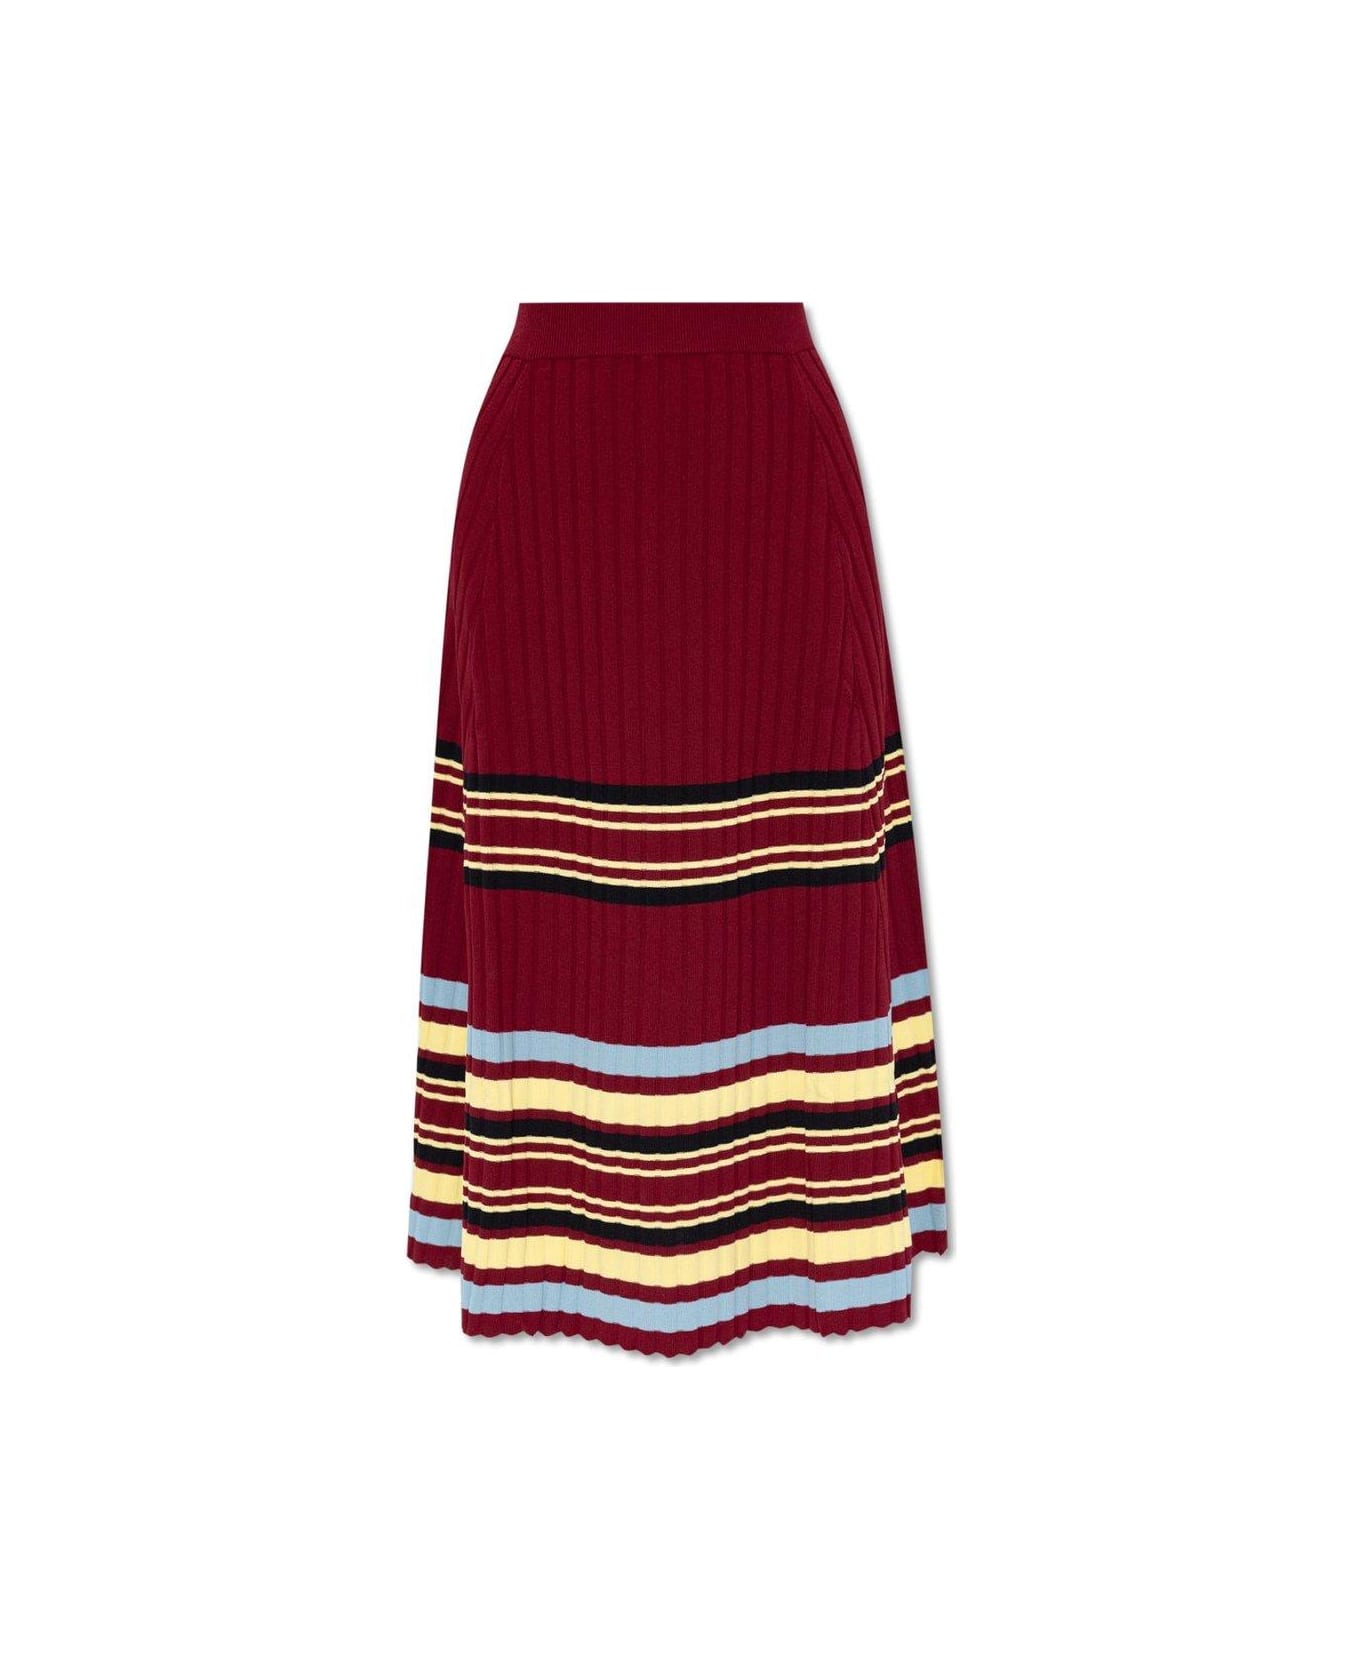 Wales Bonner Wander Pleated Flared Hem Midi Skirt - Red Yellow And Blue